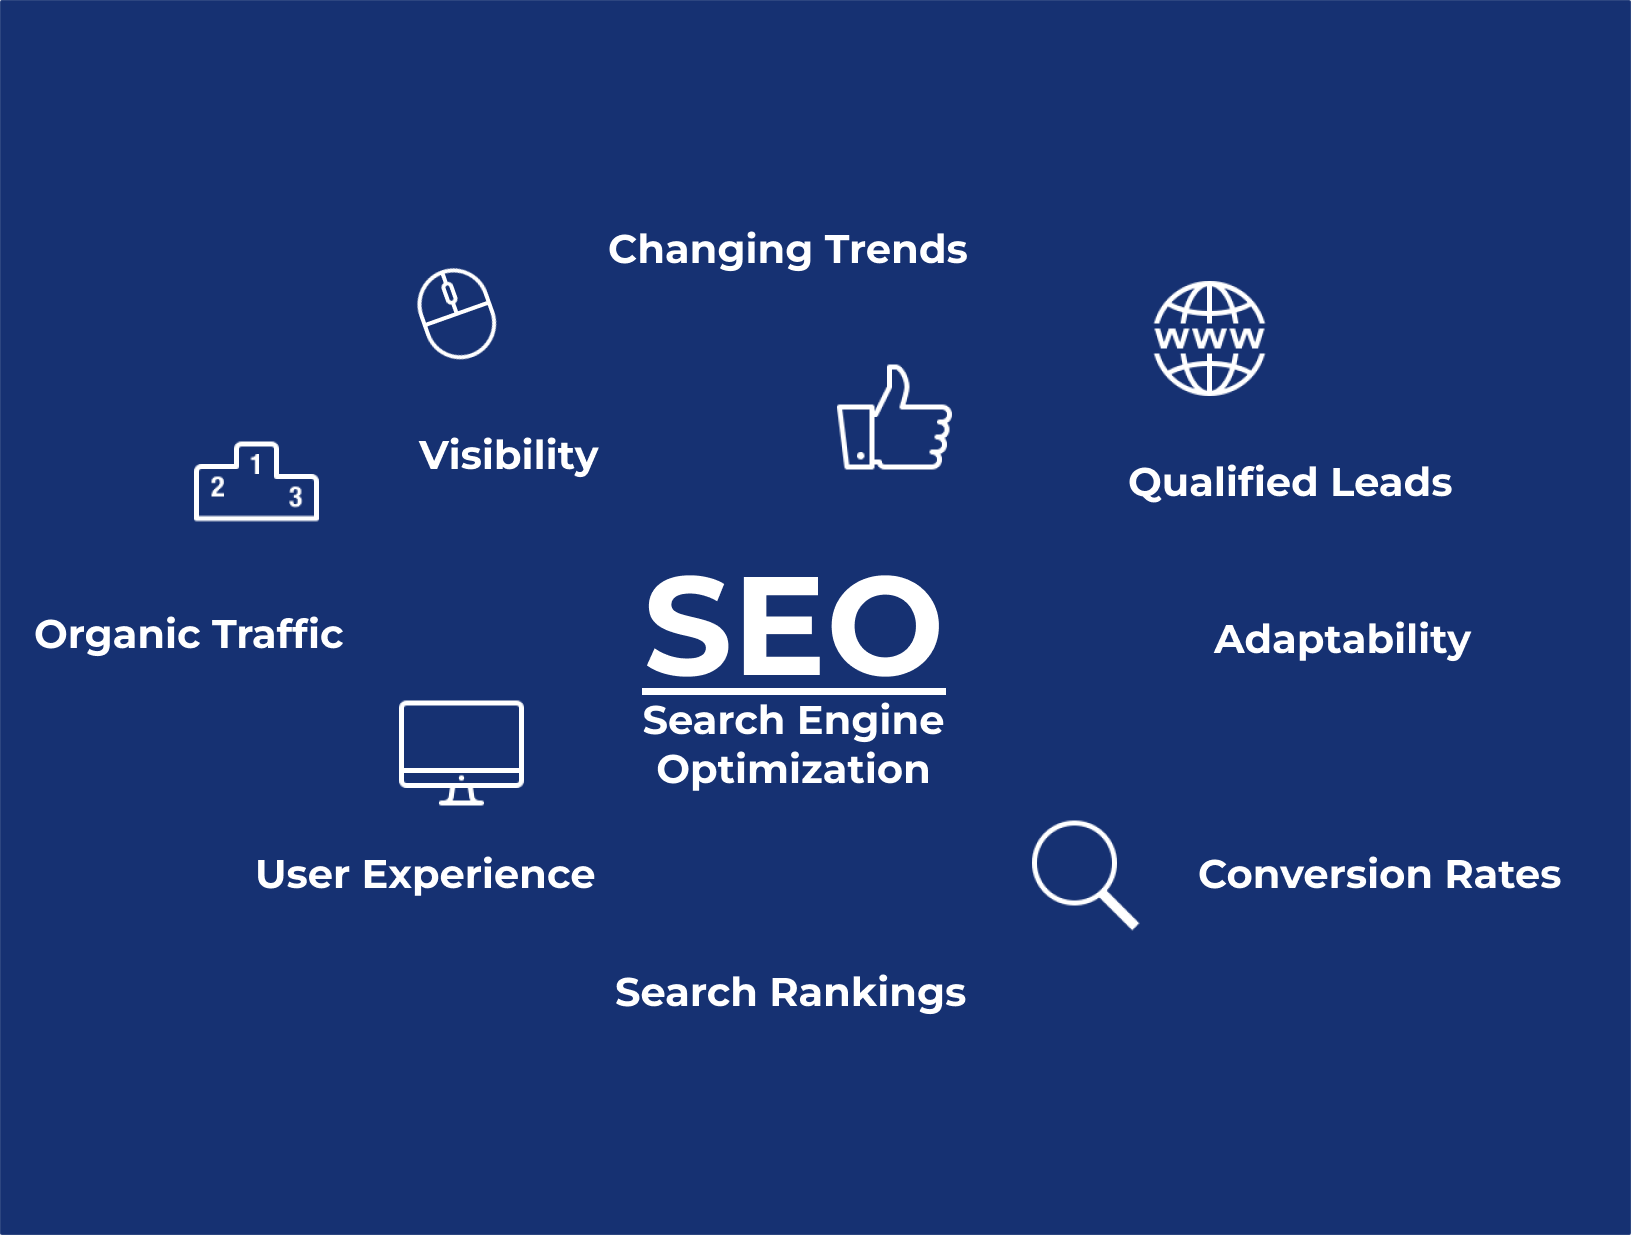 EO (Search Engine Optimization) mindmap with characteristics and icons related to main point